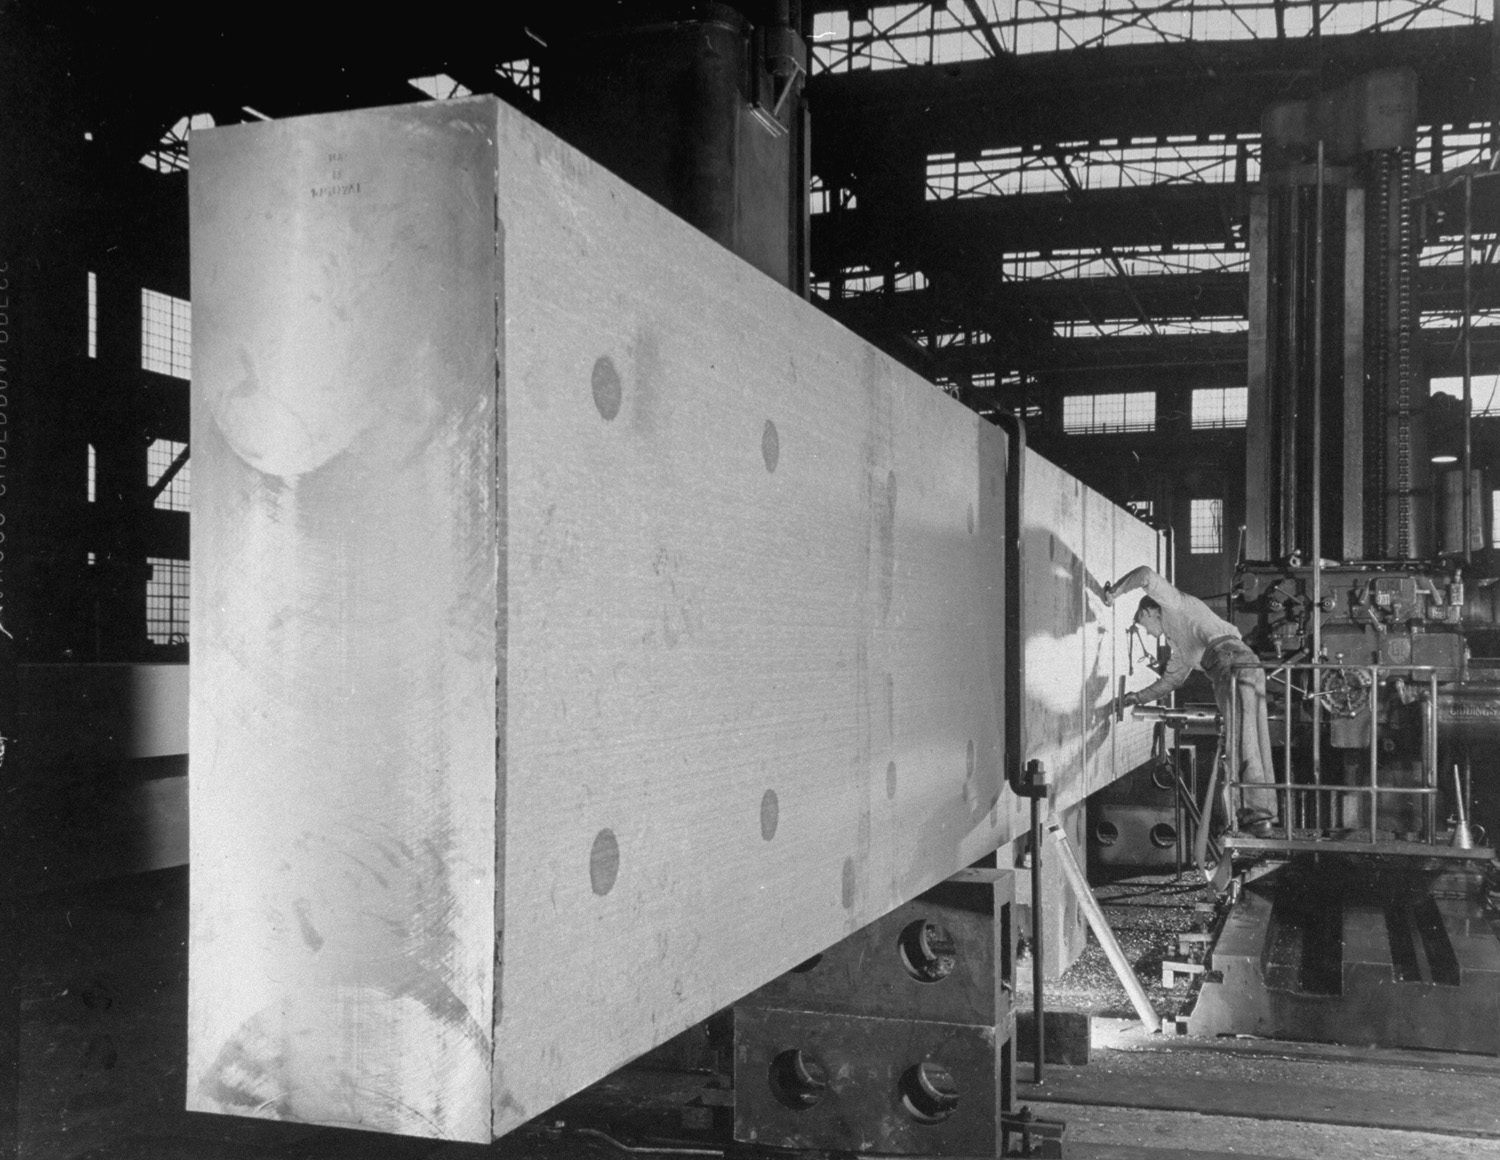 A steel worker in Bethlehem, Penn., drills holes in a massive, forged beam; the beam will form part of the framework of a large cyclotron magnet.